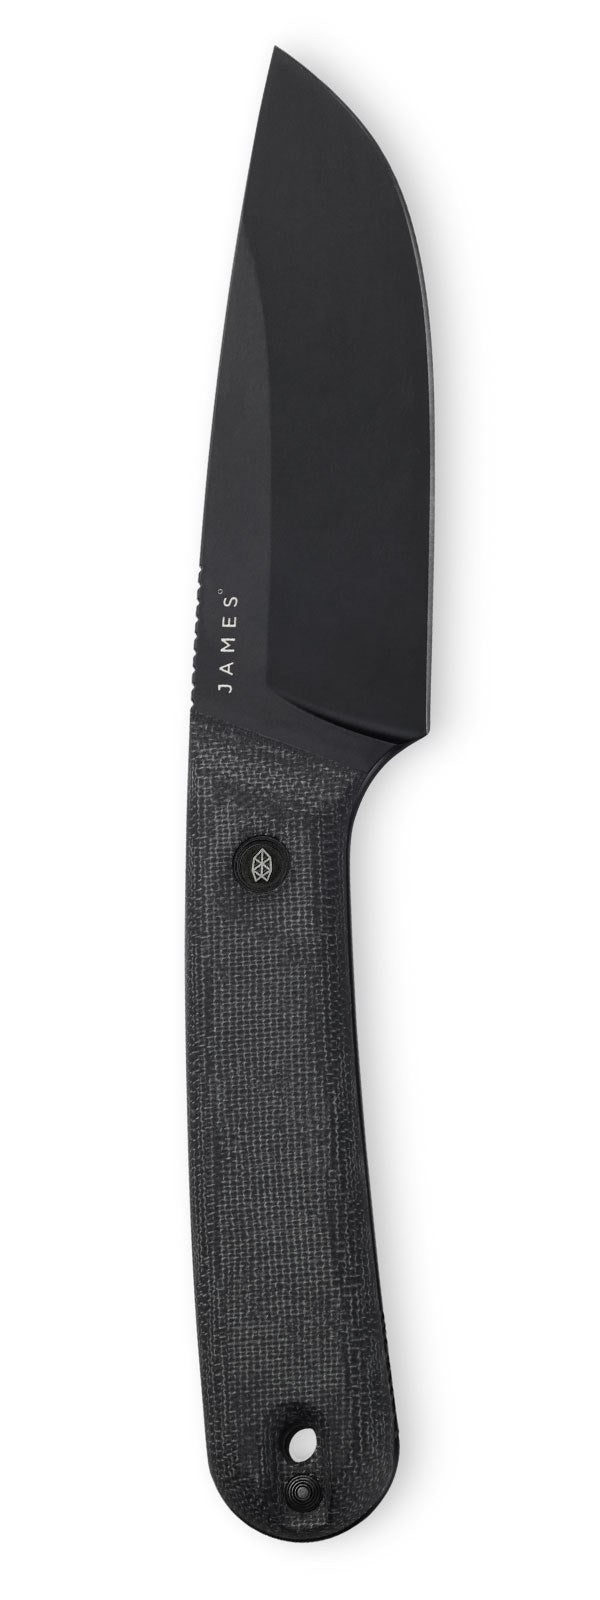 The Hell Gap knife with black handle and black blade.